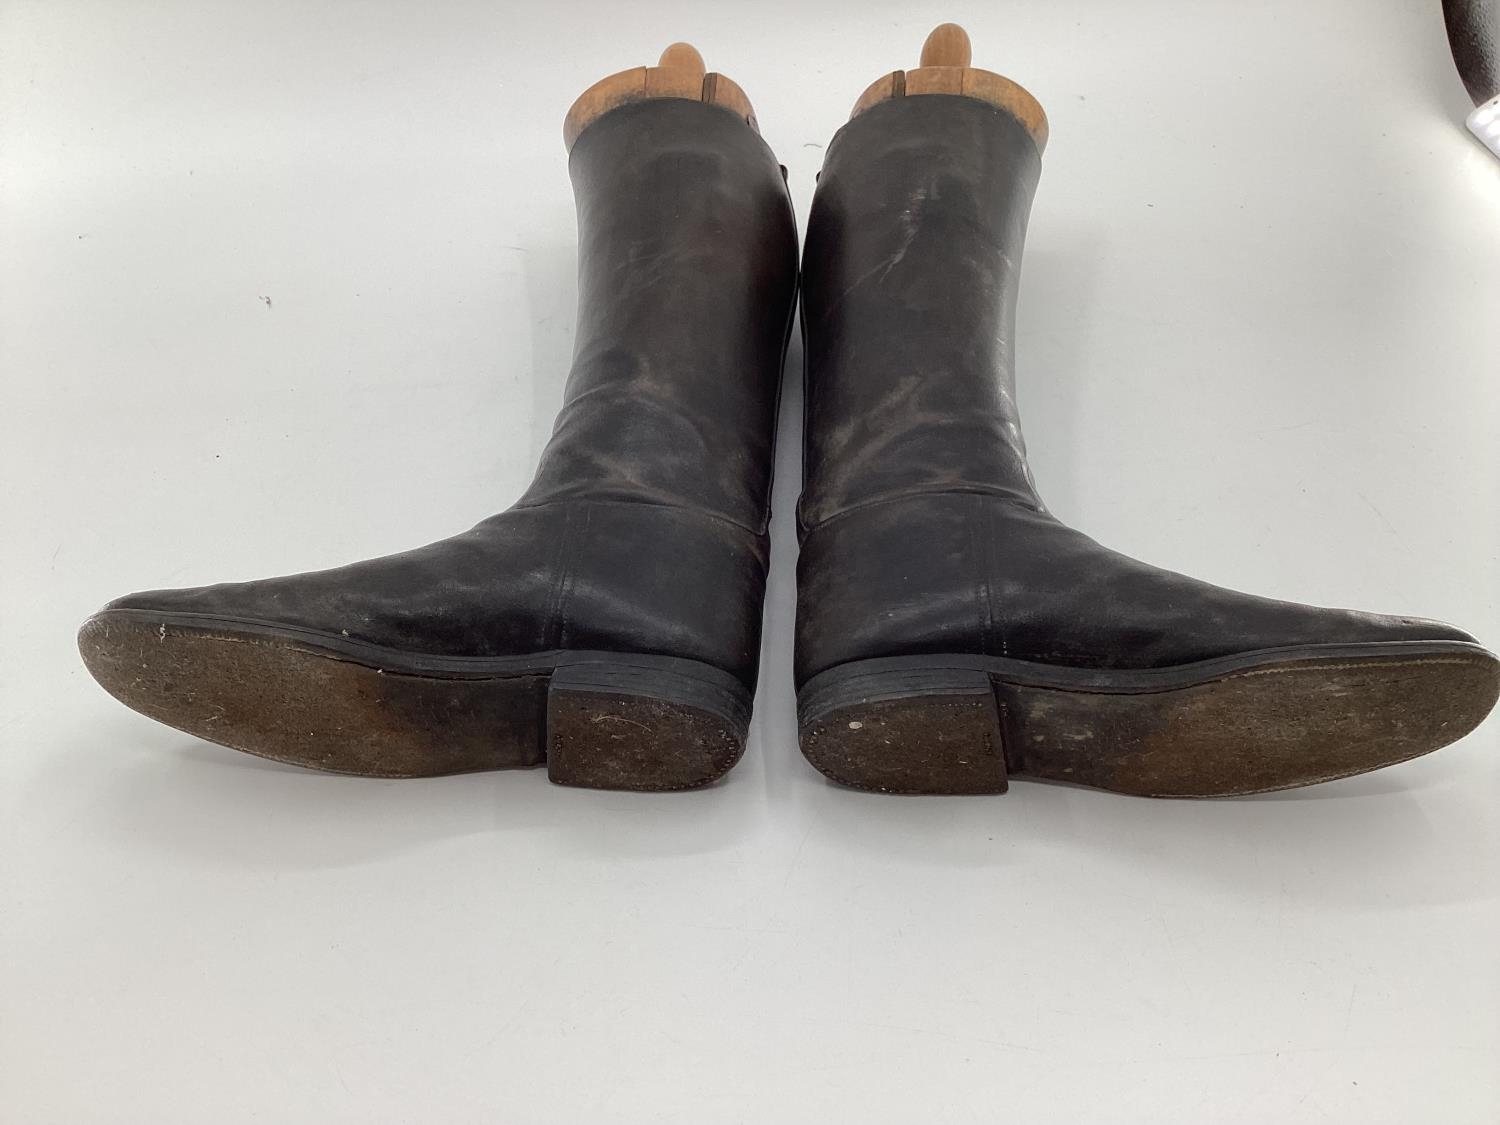 Pair of black leather hunting boots by Rowell and Sons Melton Mowbray with wooden trees - Image 5 of 6